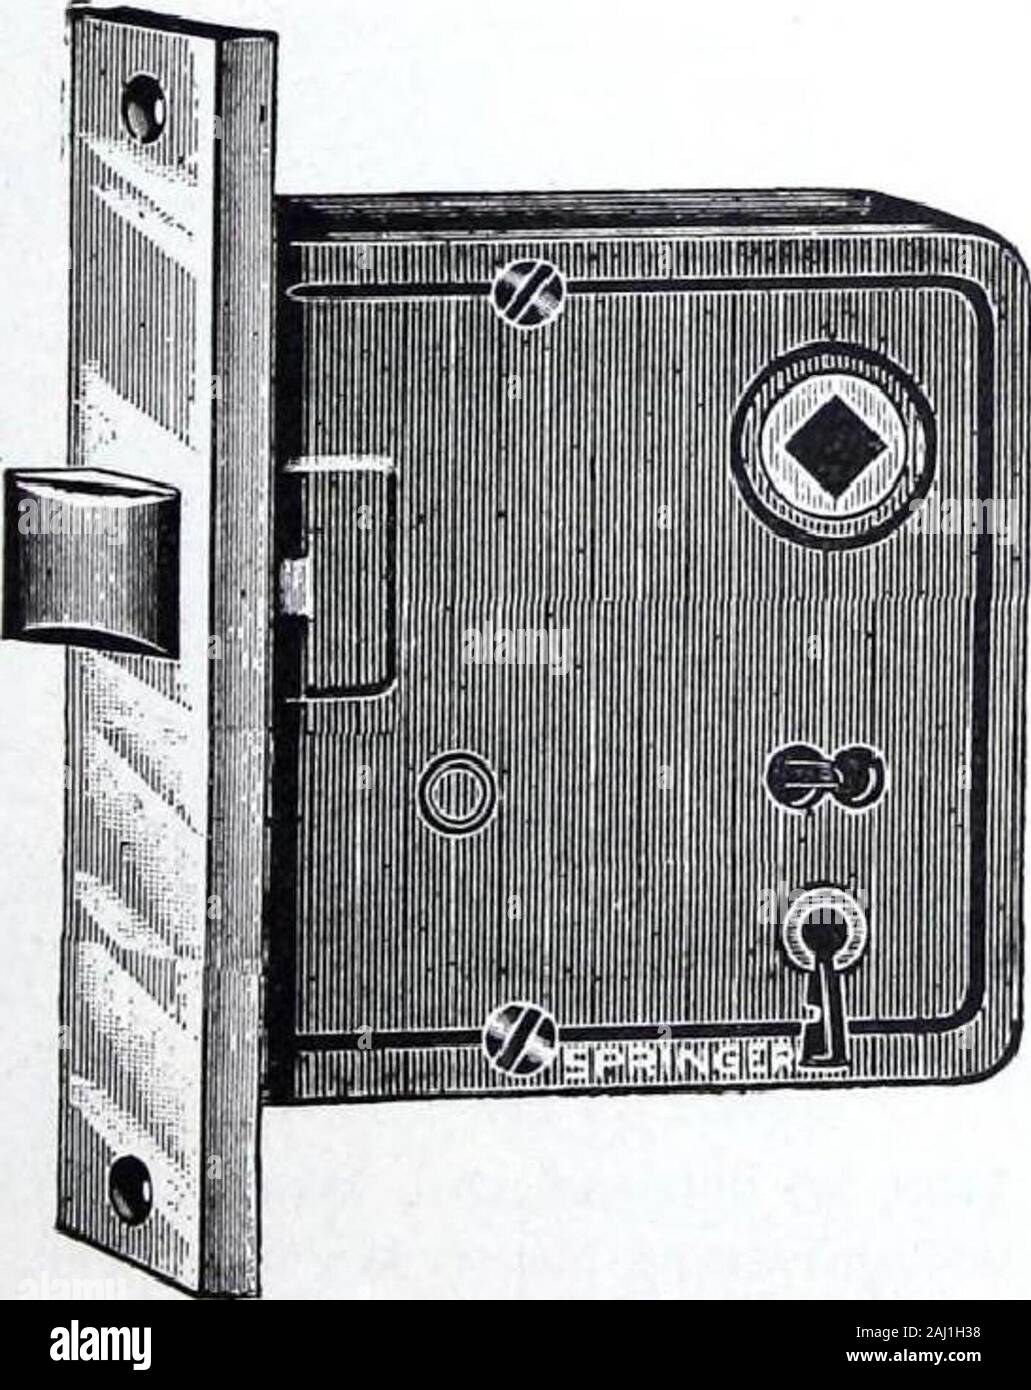 Illustrated Catalogue of Locks and Builders Hardware . e^4f^ x 3J^ x ^^ in Cast Iron. Front—6&gt;g x 1&gt;^ in. Cast Bronze. Spacing—3 5^ in. Backset—2JJ-ie in. Action—Coil Spring on Knob and Latch;Key—N.P. Steel No. 260. No. 820 —Cast Bronze Front, Oae Tumbler,Key No. 260. No. 8203—Cast Bronze Front, Three Tumb-lers, Key No. 260. MASTER KEYING I Three Tumbler Locks—-Master-keyed inone set of 360 all different, or in 6 sets of60 each. Each set passed by its ownMaster key and all passed by GrandMaster key. Also Master-keyed withother locks having same class Masterkey, WITH EXTRA HEAVY KEY. No. Stock Photo